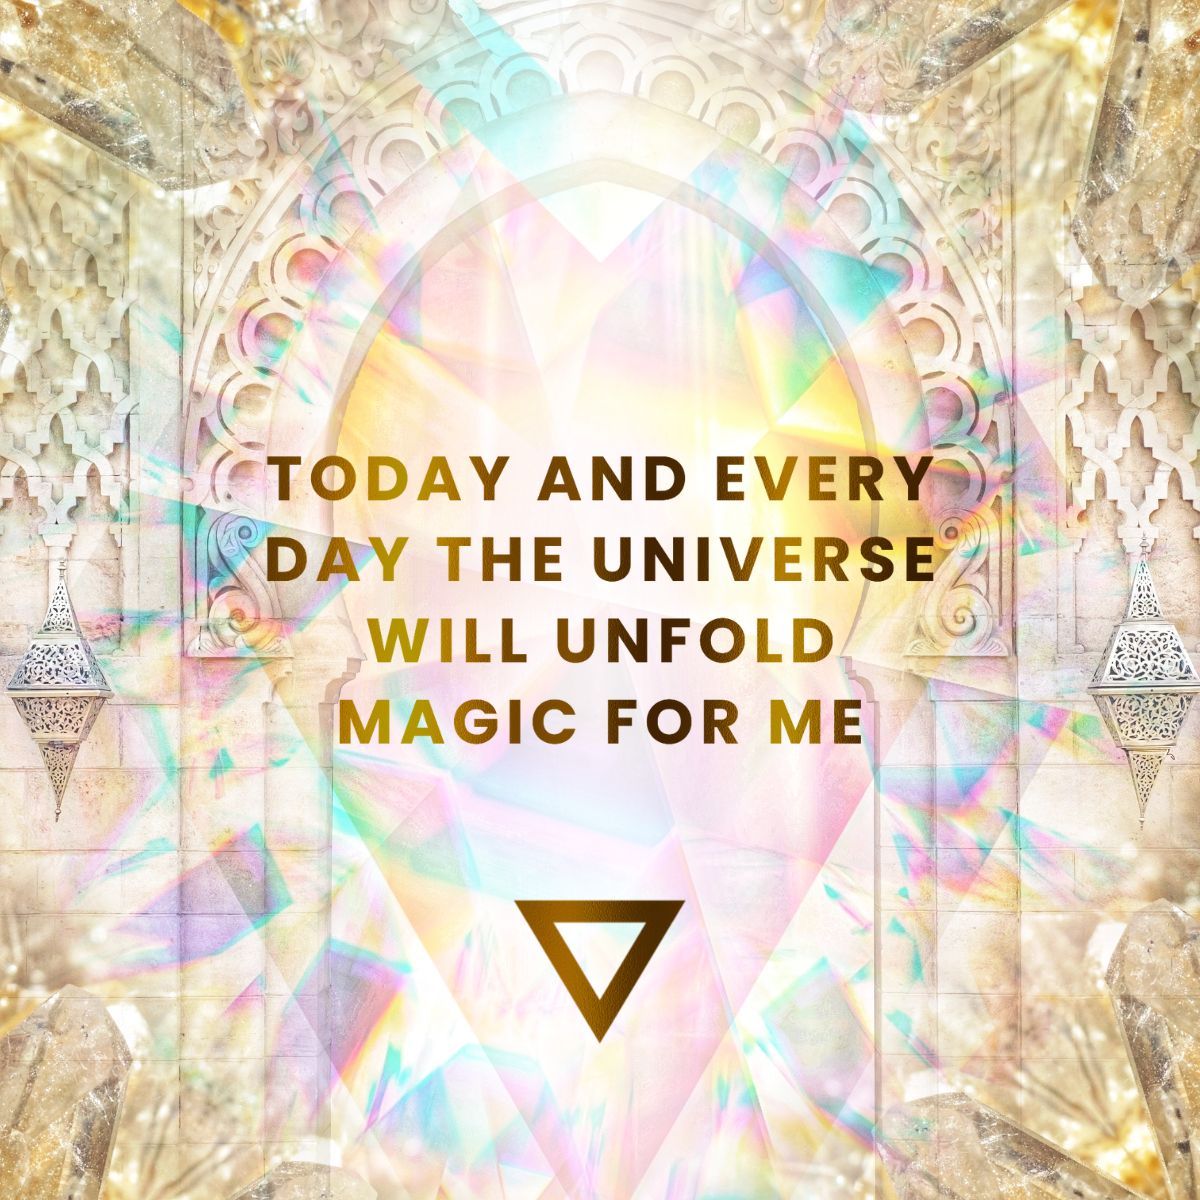 Today and Every Day the Universe will Unfold Magic for Me